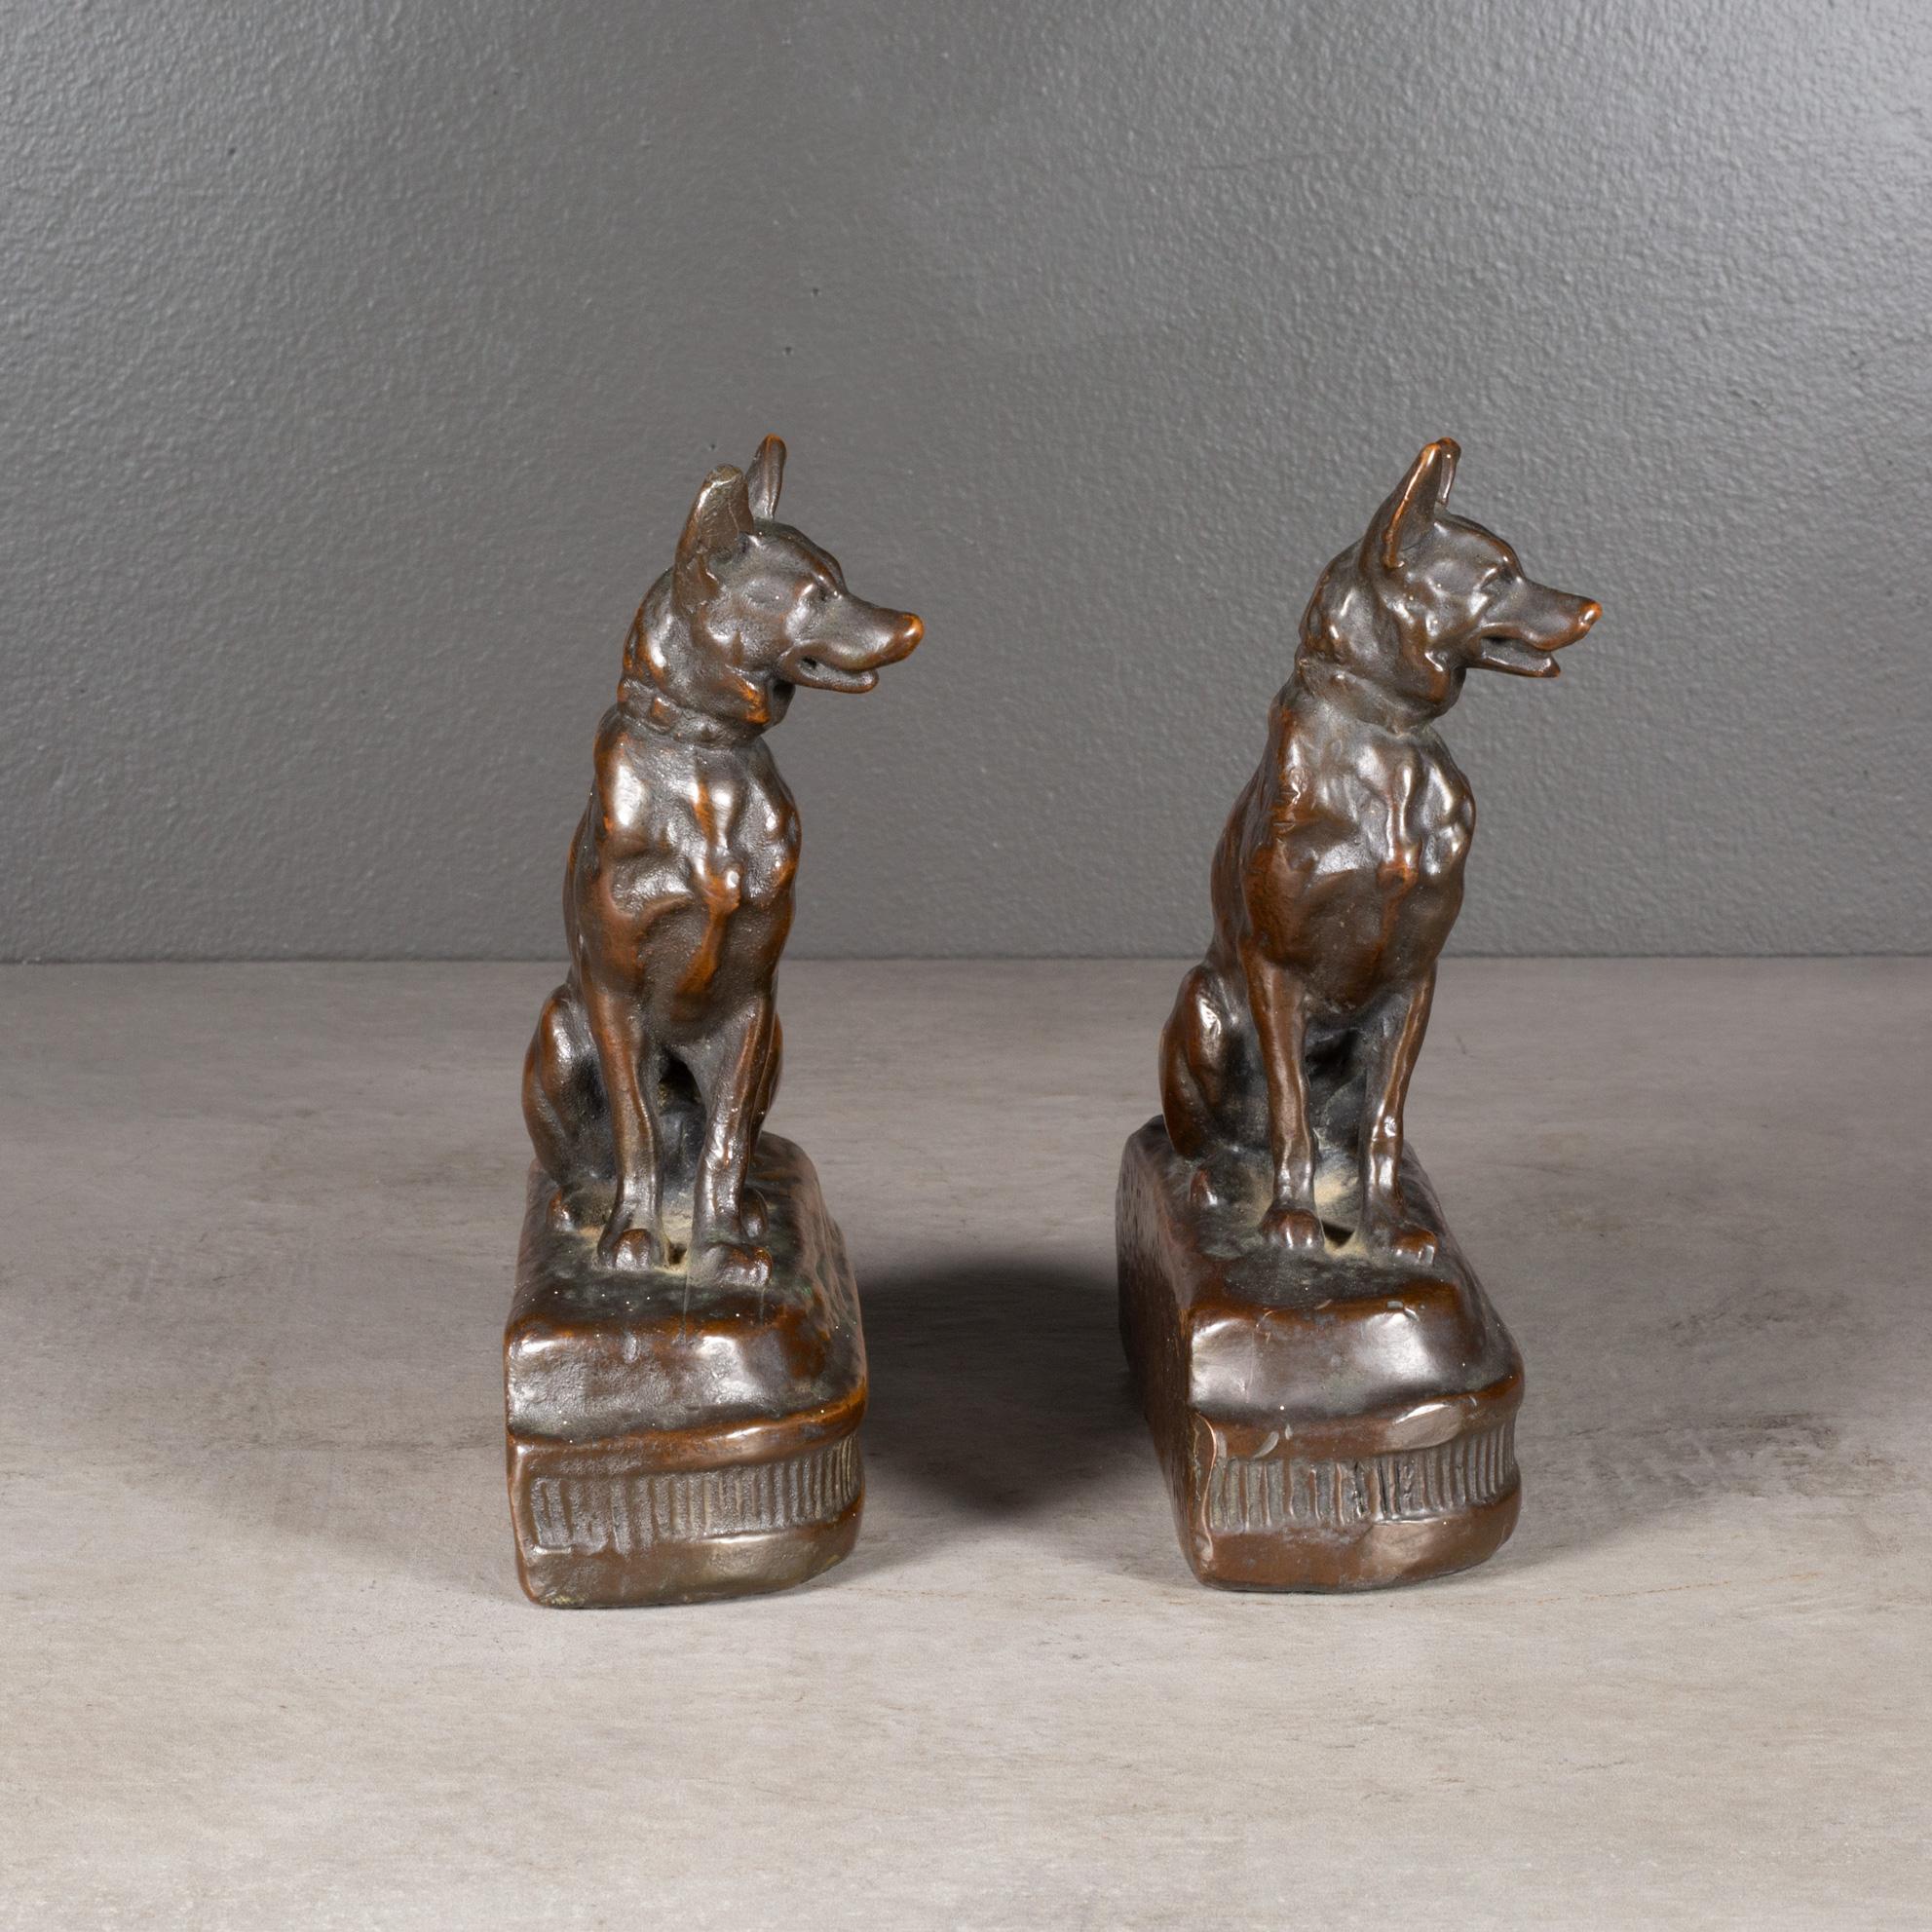 Industrial Bronze Cast German Shepherd Bookends by Armor Bronze, C.1930 (FREE SHIPPING) For Sale